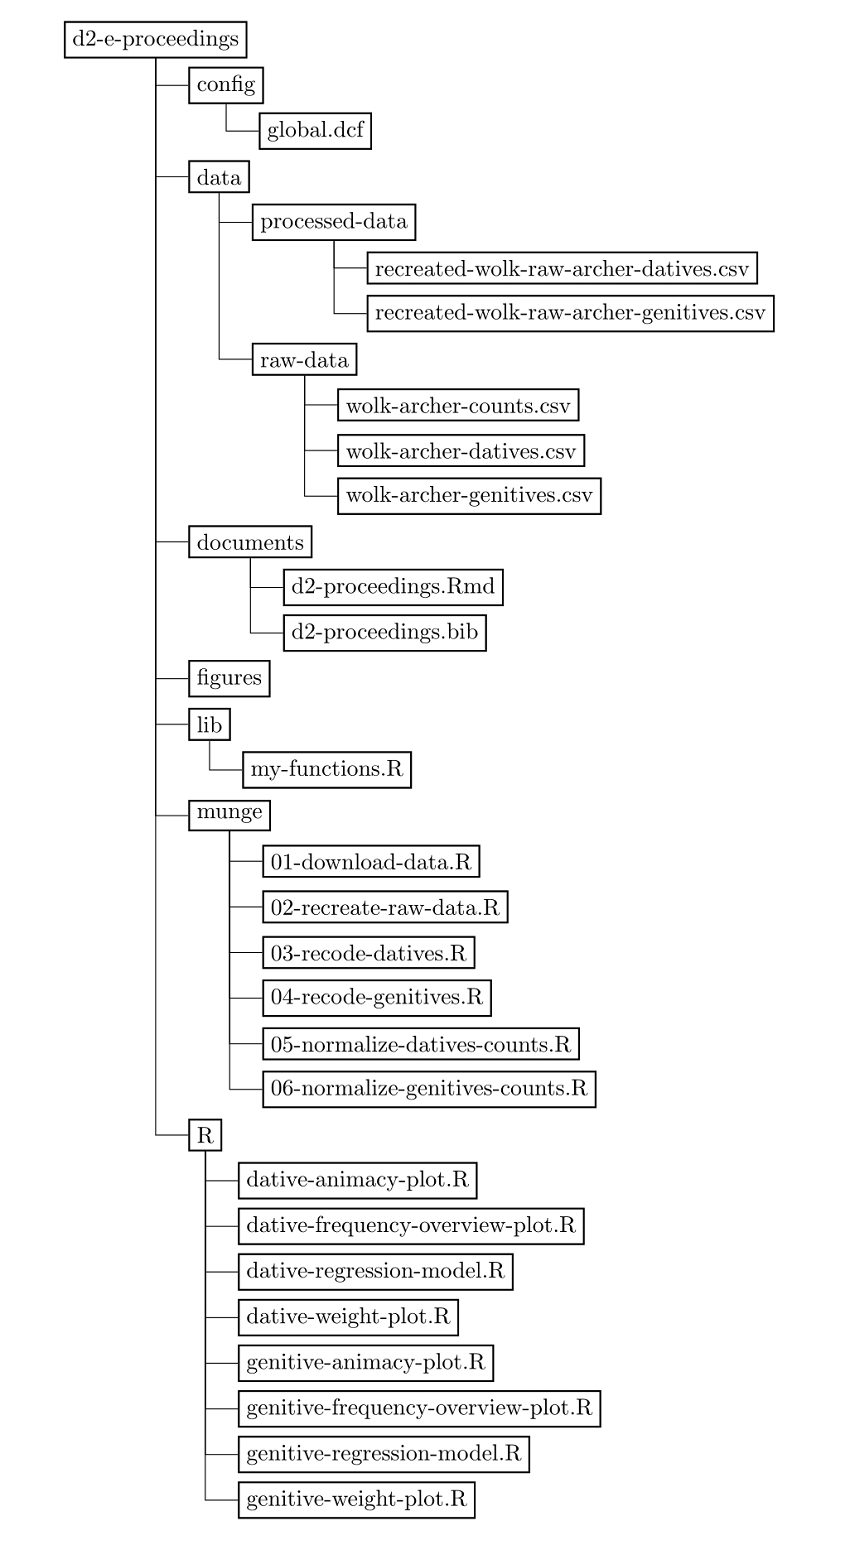 Figure 2. Example Project Directory Tree.